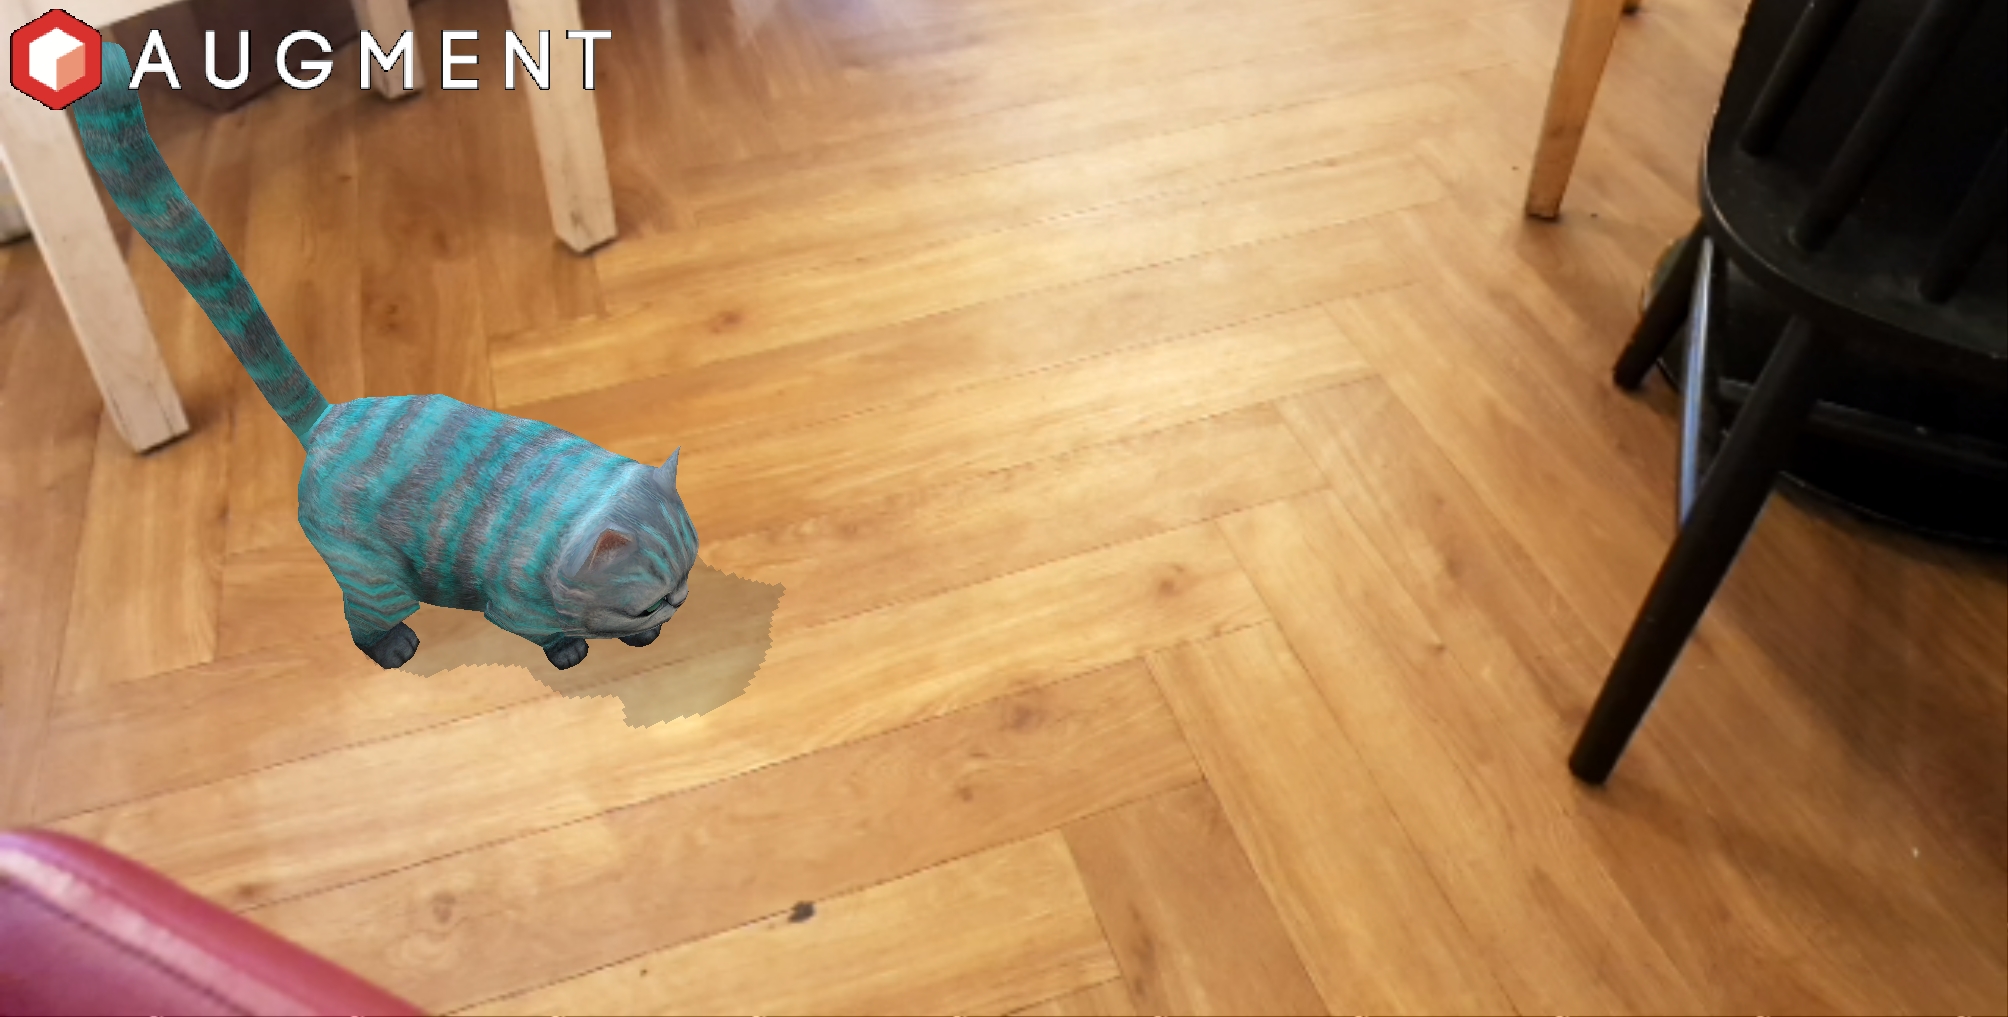 Photo of an augmented reality cat in a room.